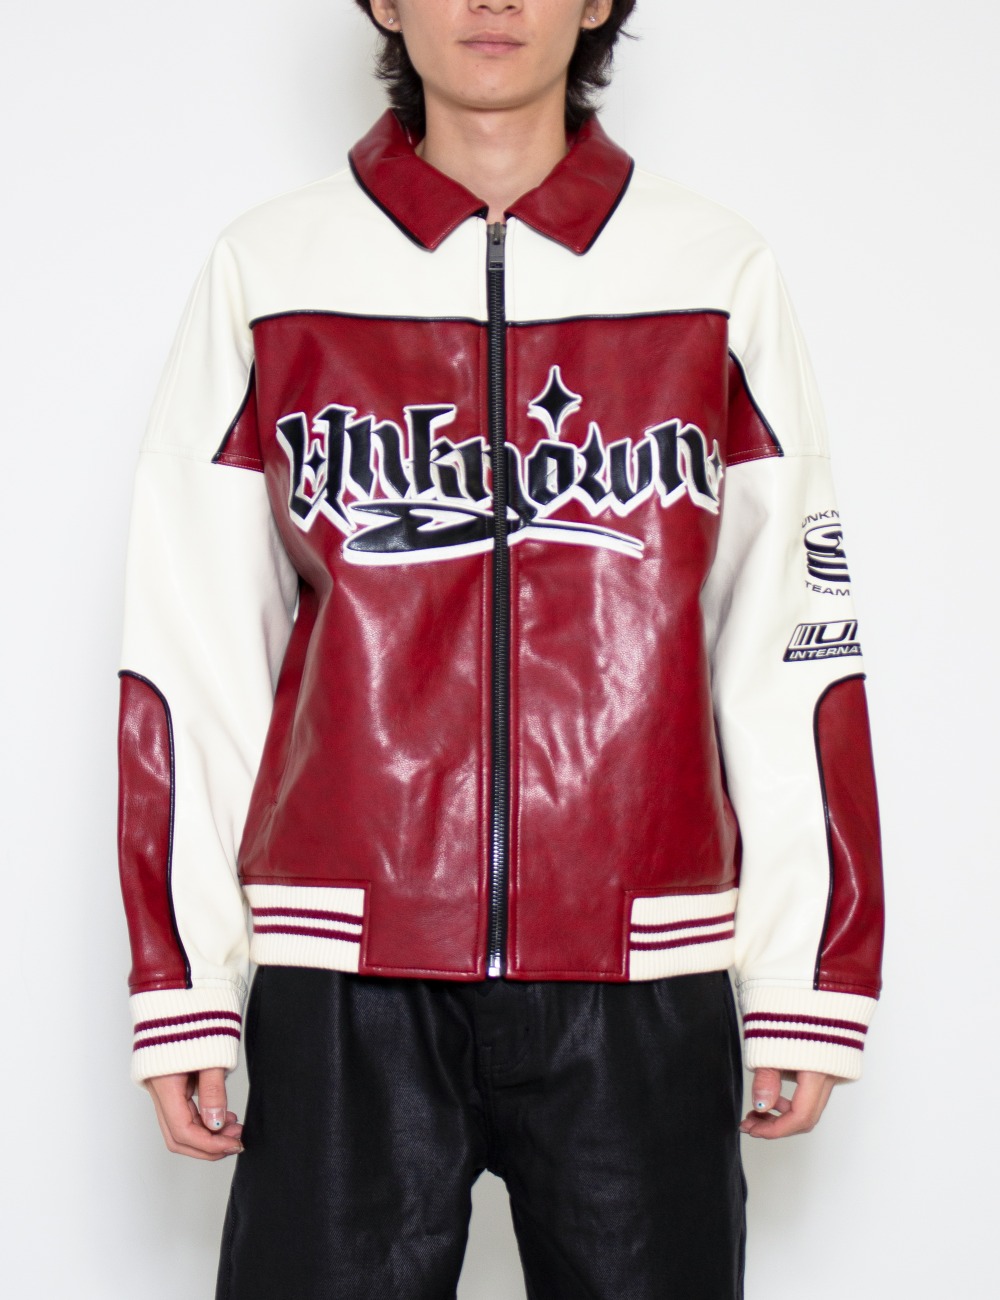 UNKNOWN RACING TEAM LEATHER JACKET_REDWHITE